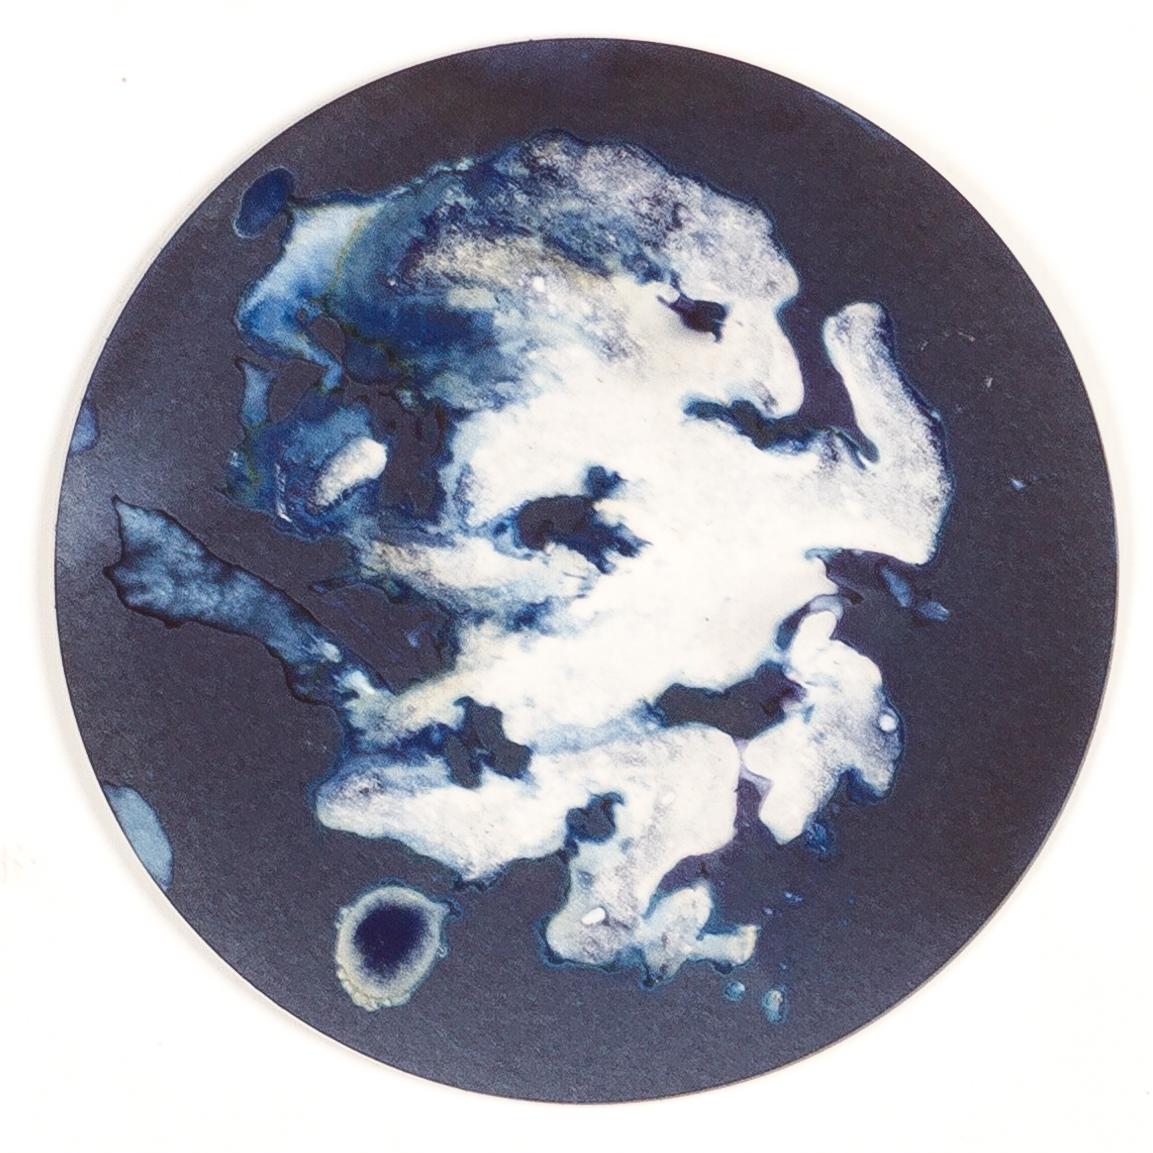 Algas 11, 22 y 67. Cyanotype photograhs mounted in high resistance glass dish - Gray Abstract Sculpture by Paola Davila